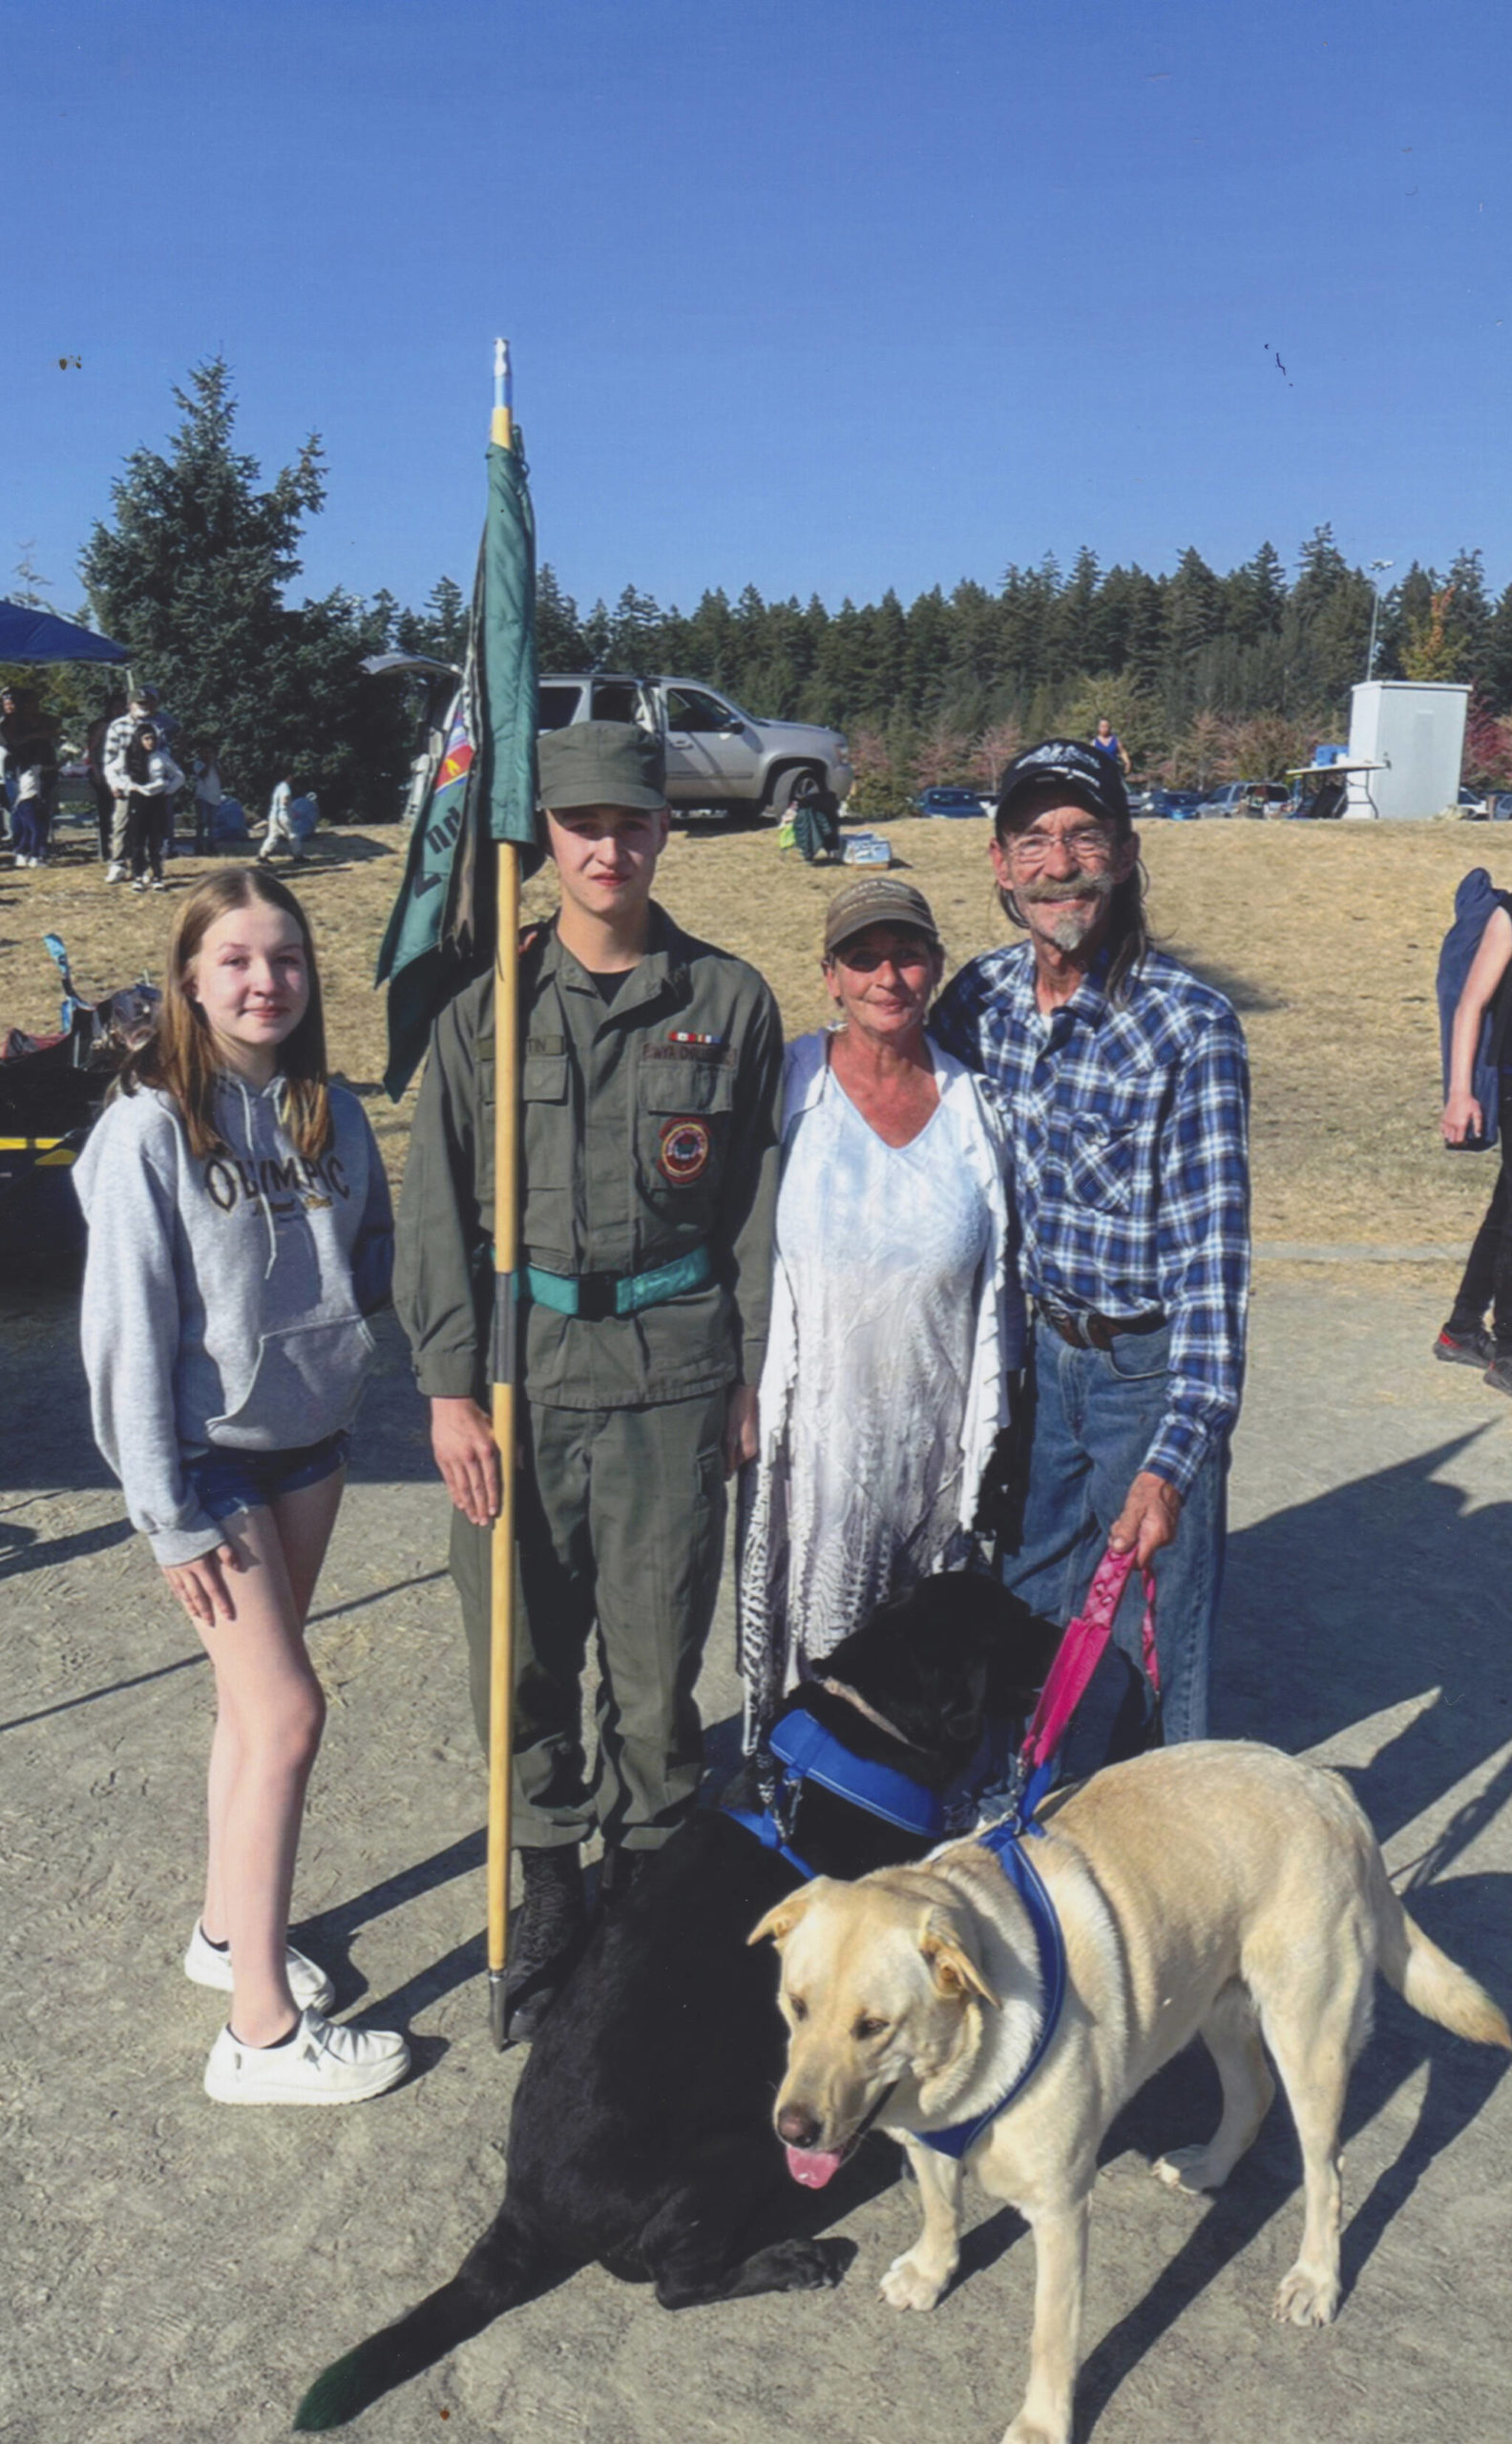 A recent family visit at the school, Liette, Devlin, Cathy, and Ray Fortin along with the dogs Zeek and Izzy. Submitted Photos